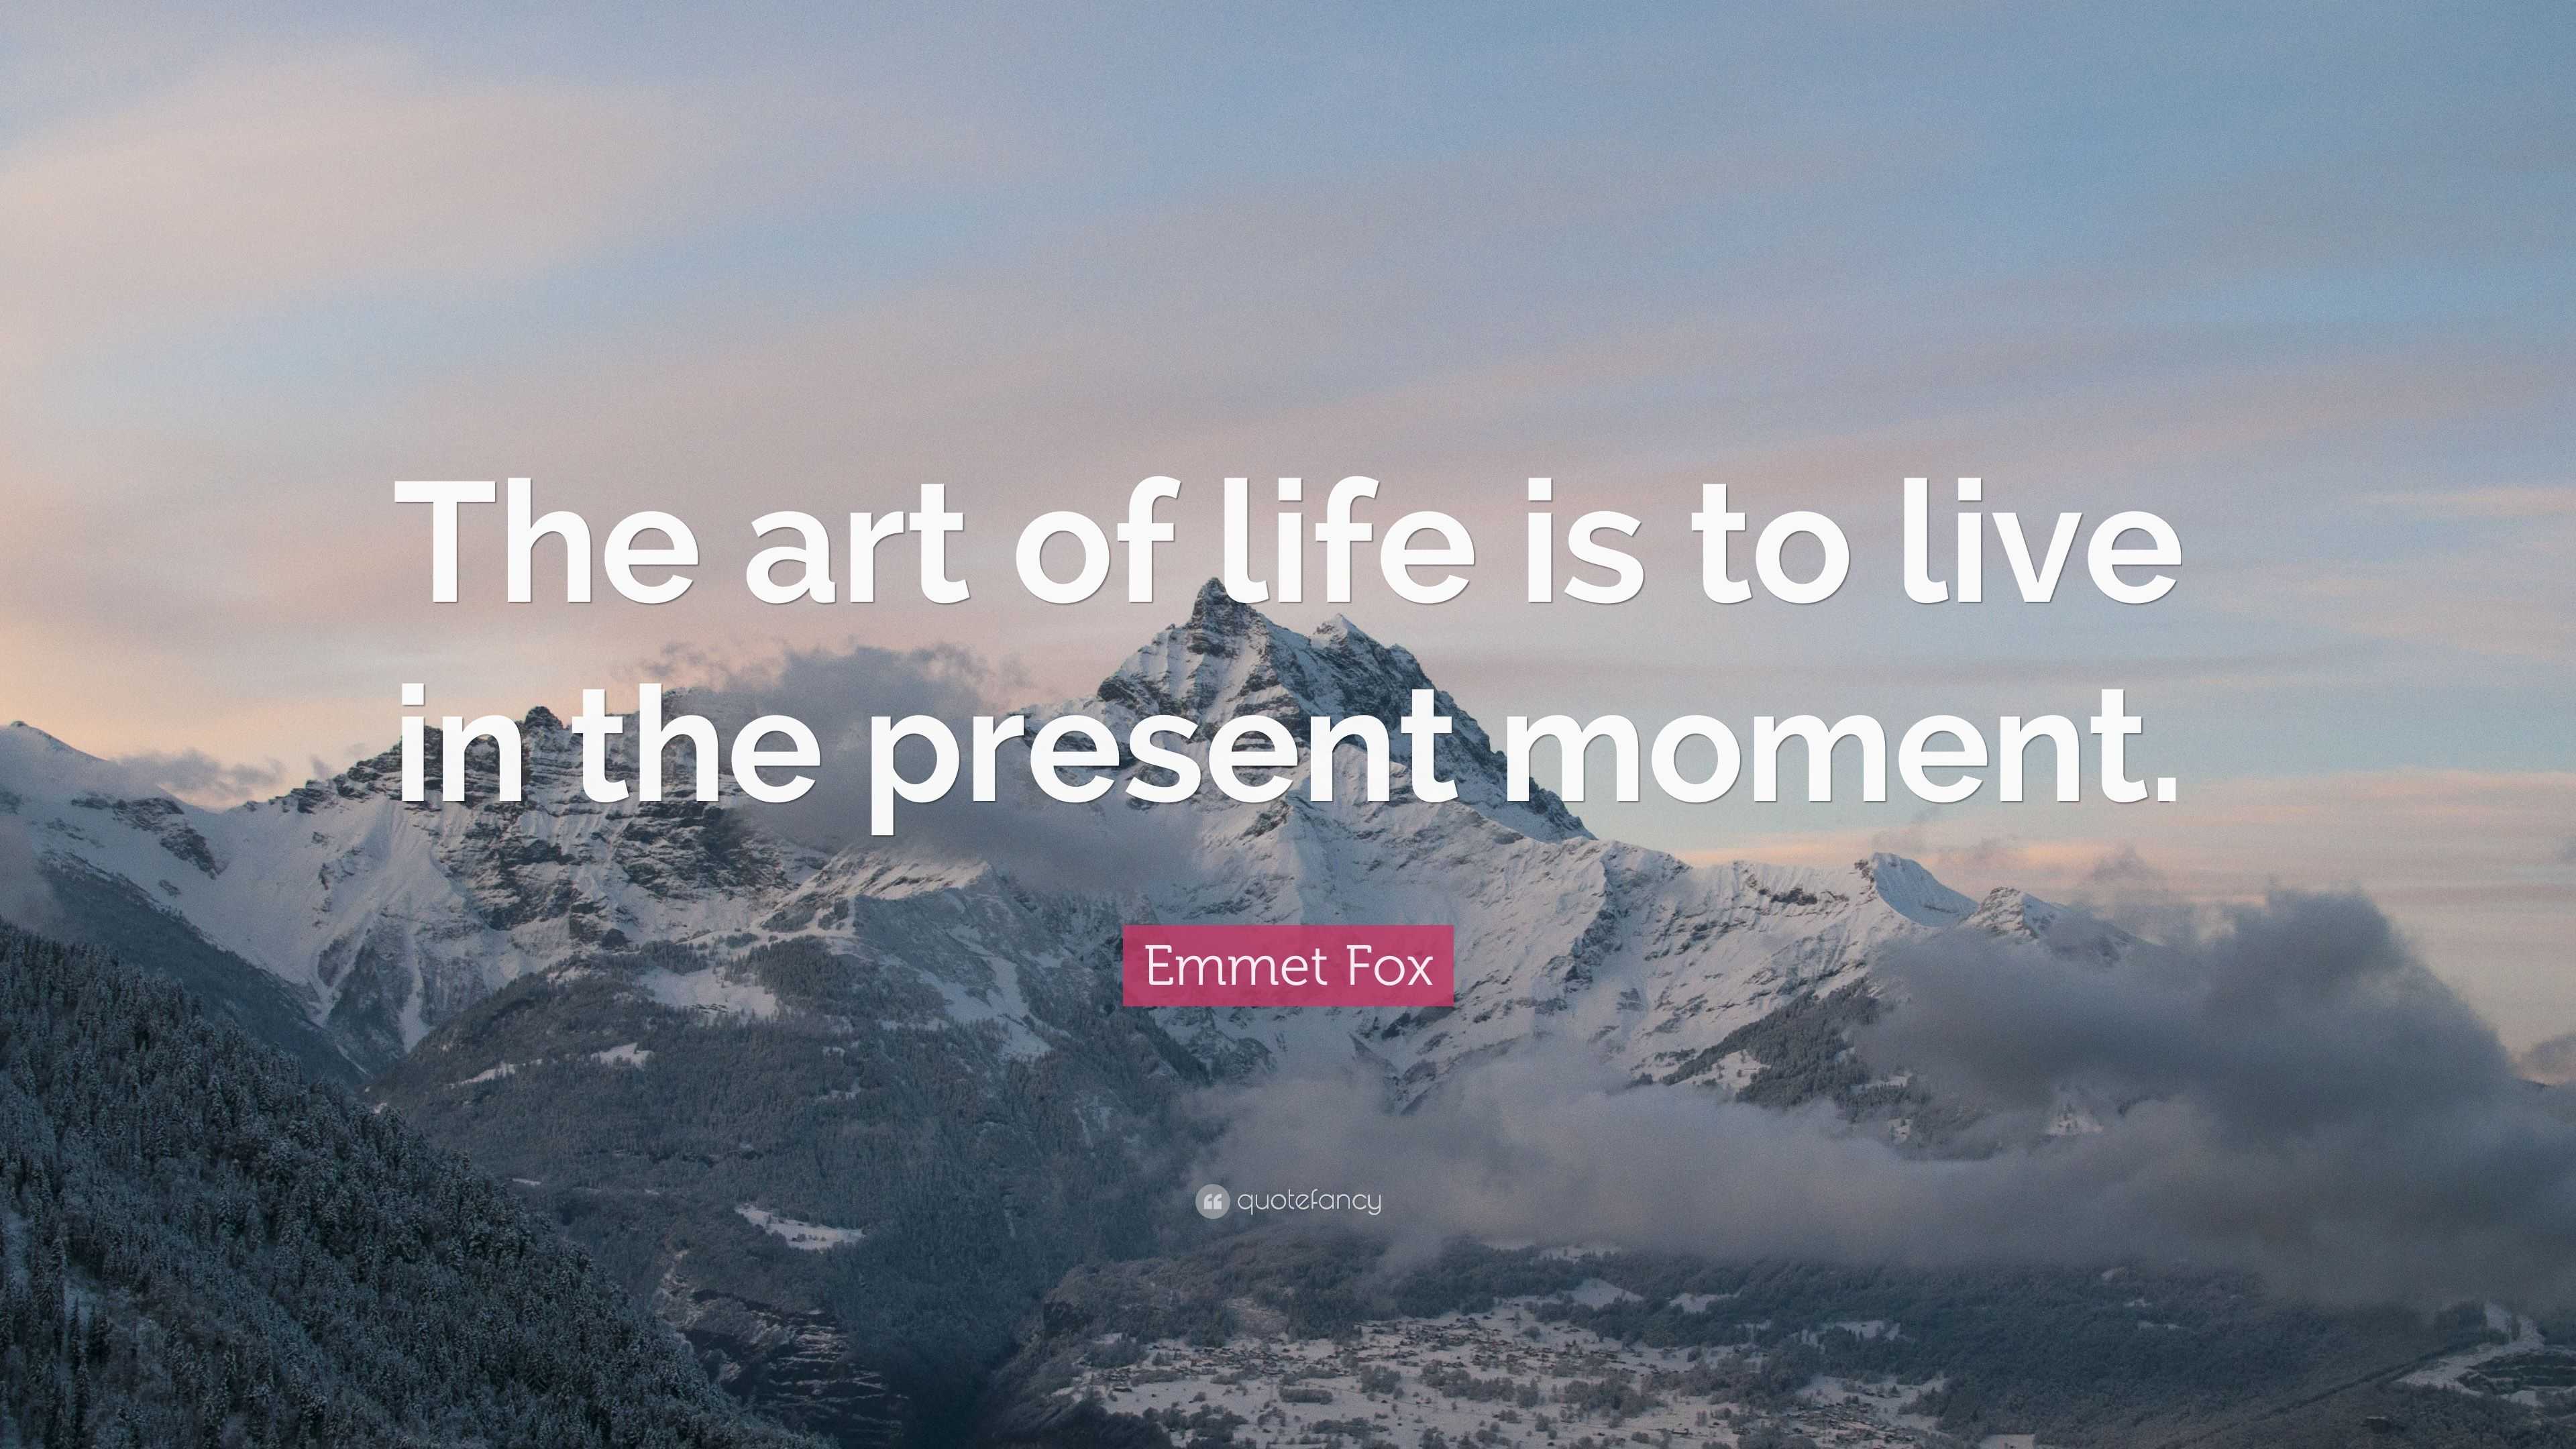 live life in the moment quotes emmet fox quote u201cthe art of life is to live in the present moment